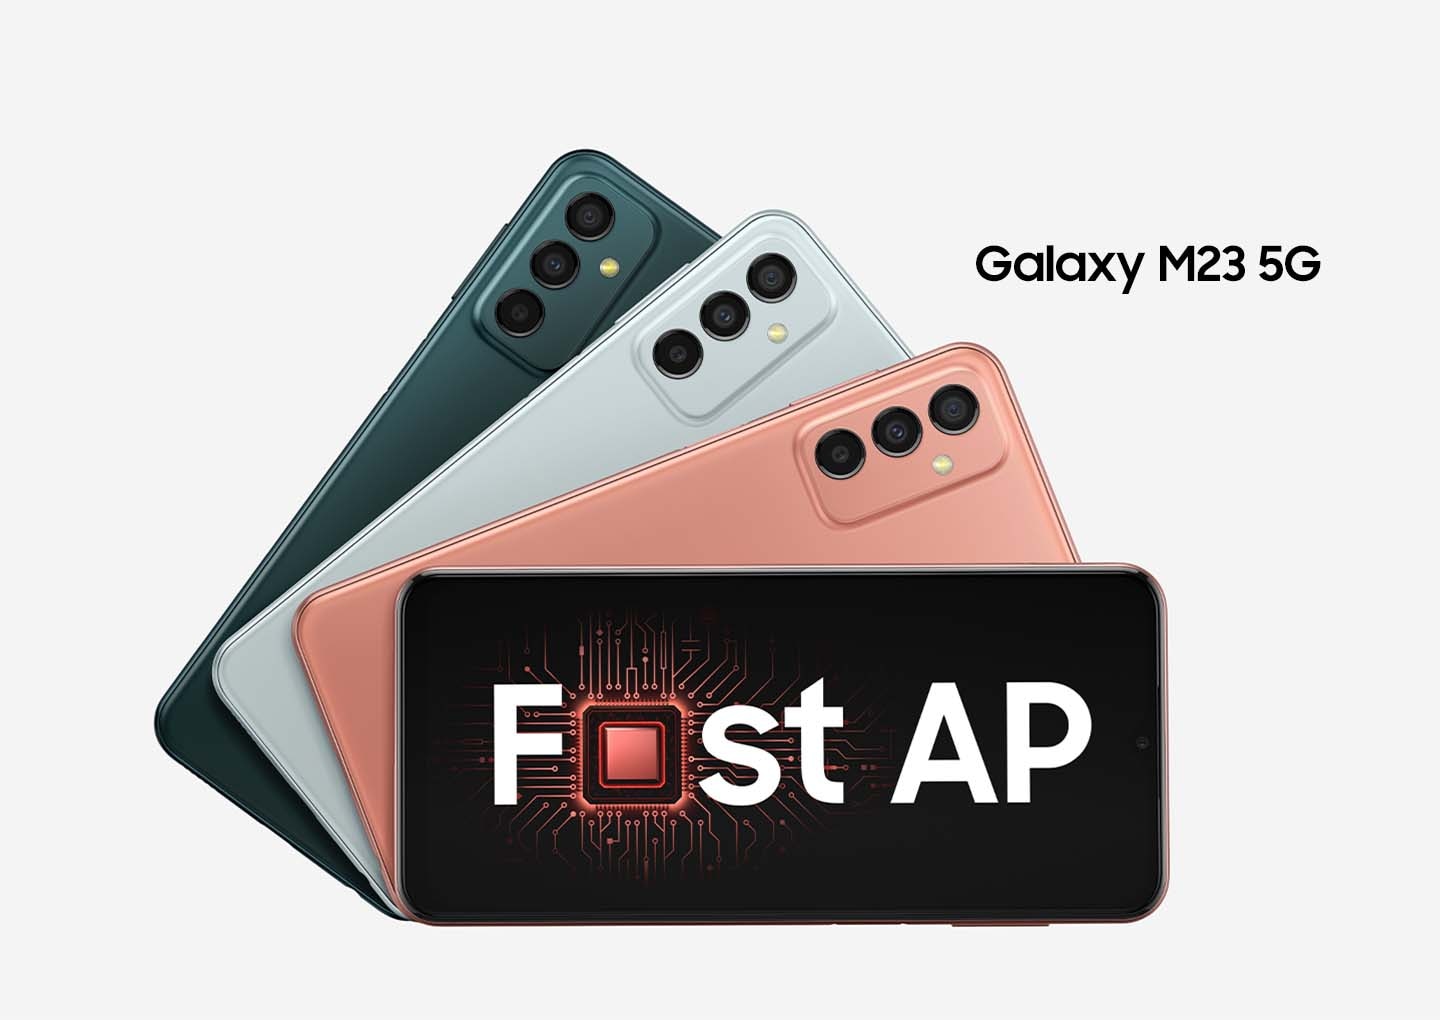 Four Galaxy M23 5G devices are placed in layers of descending angles to show different colorways of Deep Green, Light Blue and Orange Copper. The Galaxy M23 5G on the bottom shows the front with on-screen text readings Fast AP with the a in Fast replaced with a processing chip.